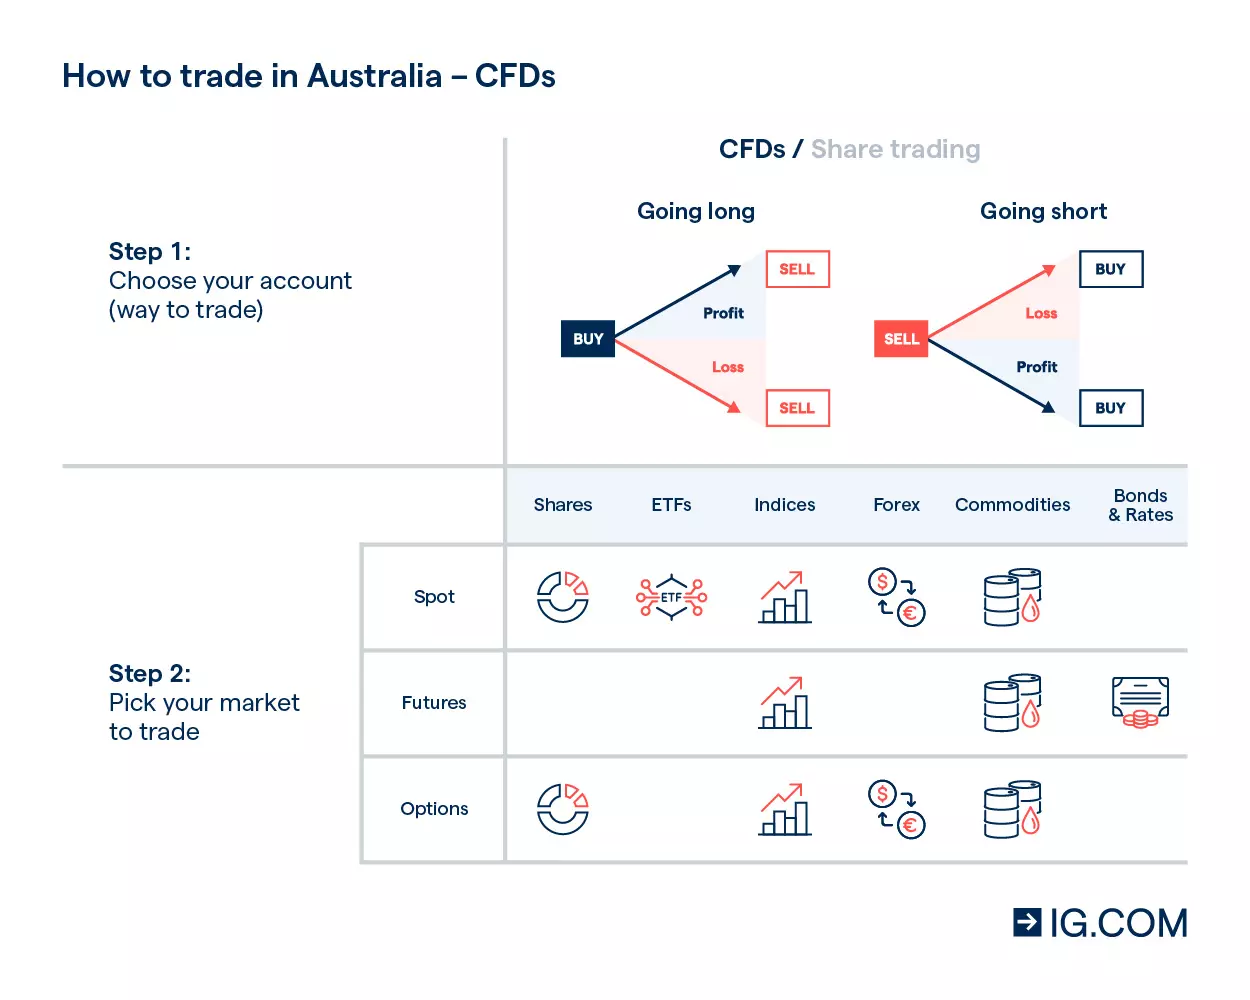 How to trade in Australia - CFDs